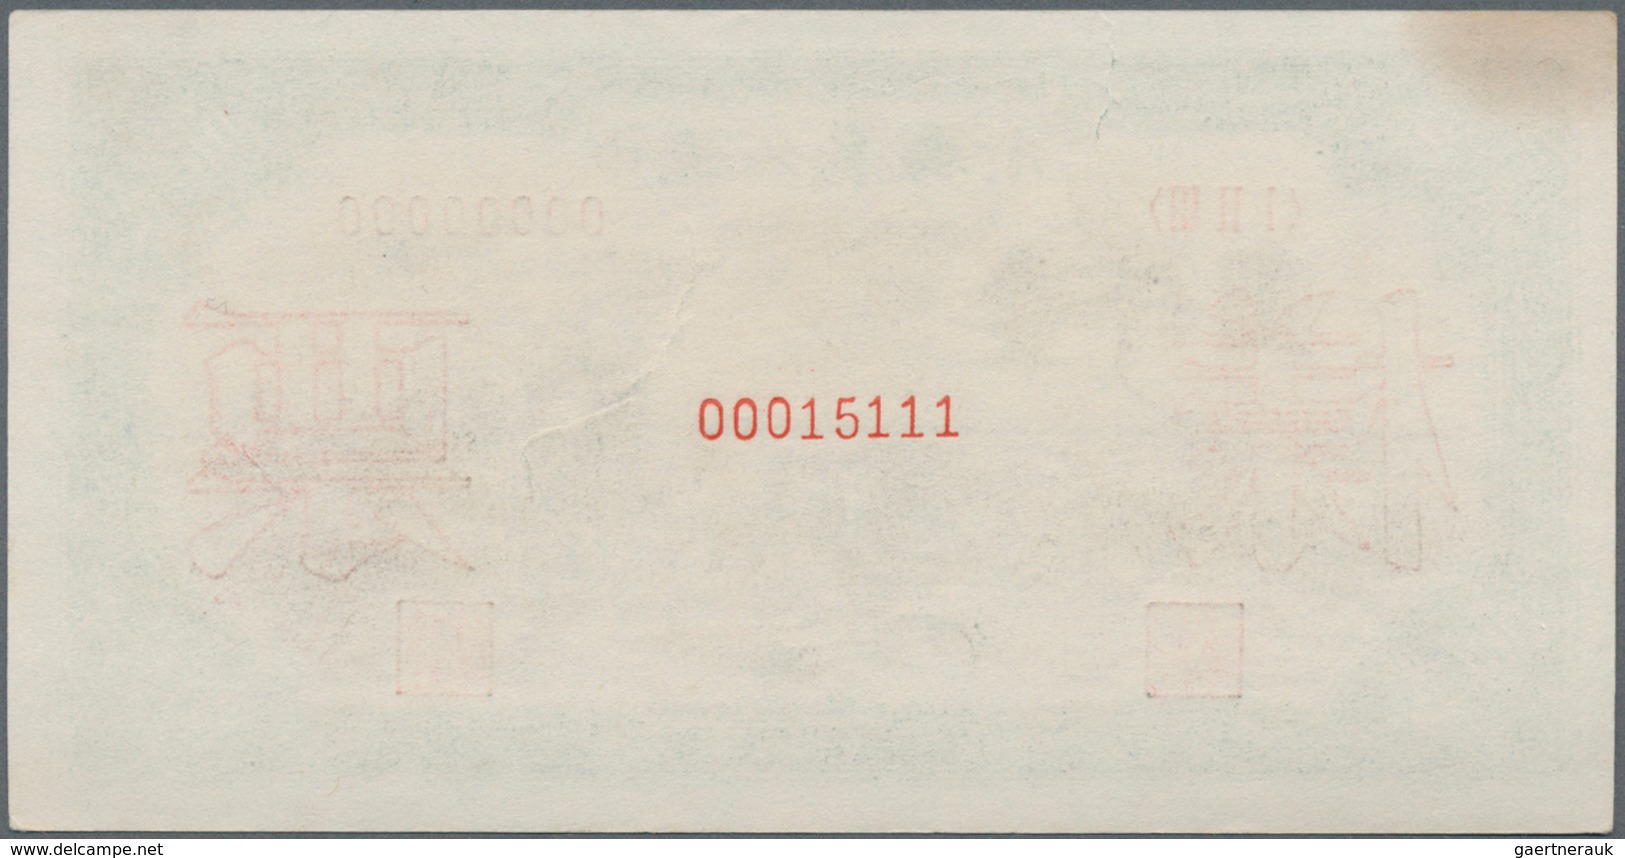 China: Peoples Bank Of China 1000 Yuan 1949 Front And Reverse SPECIMEN, P.849s With Specimen Number - Cina